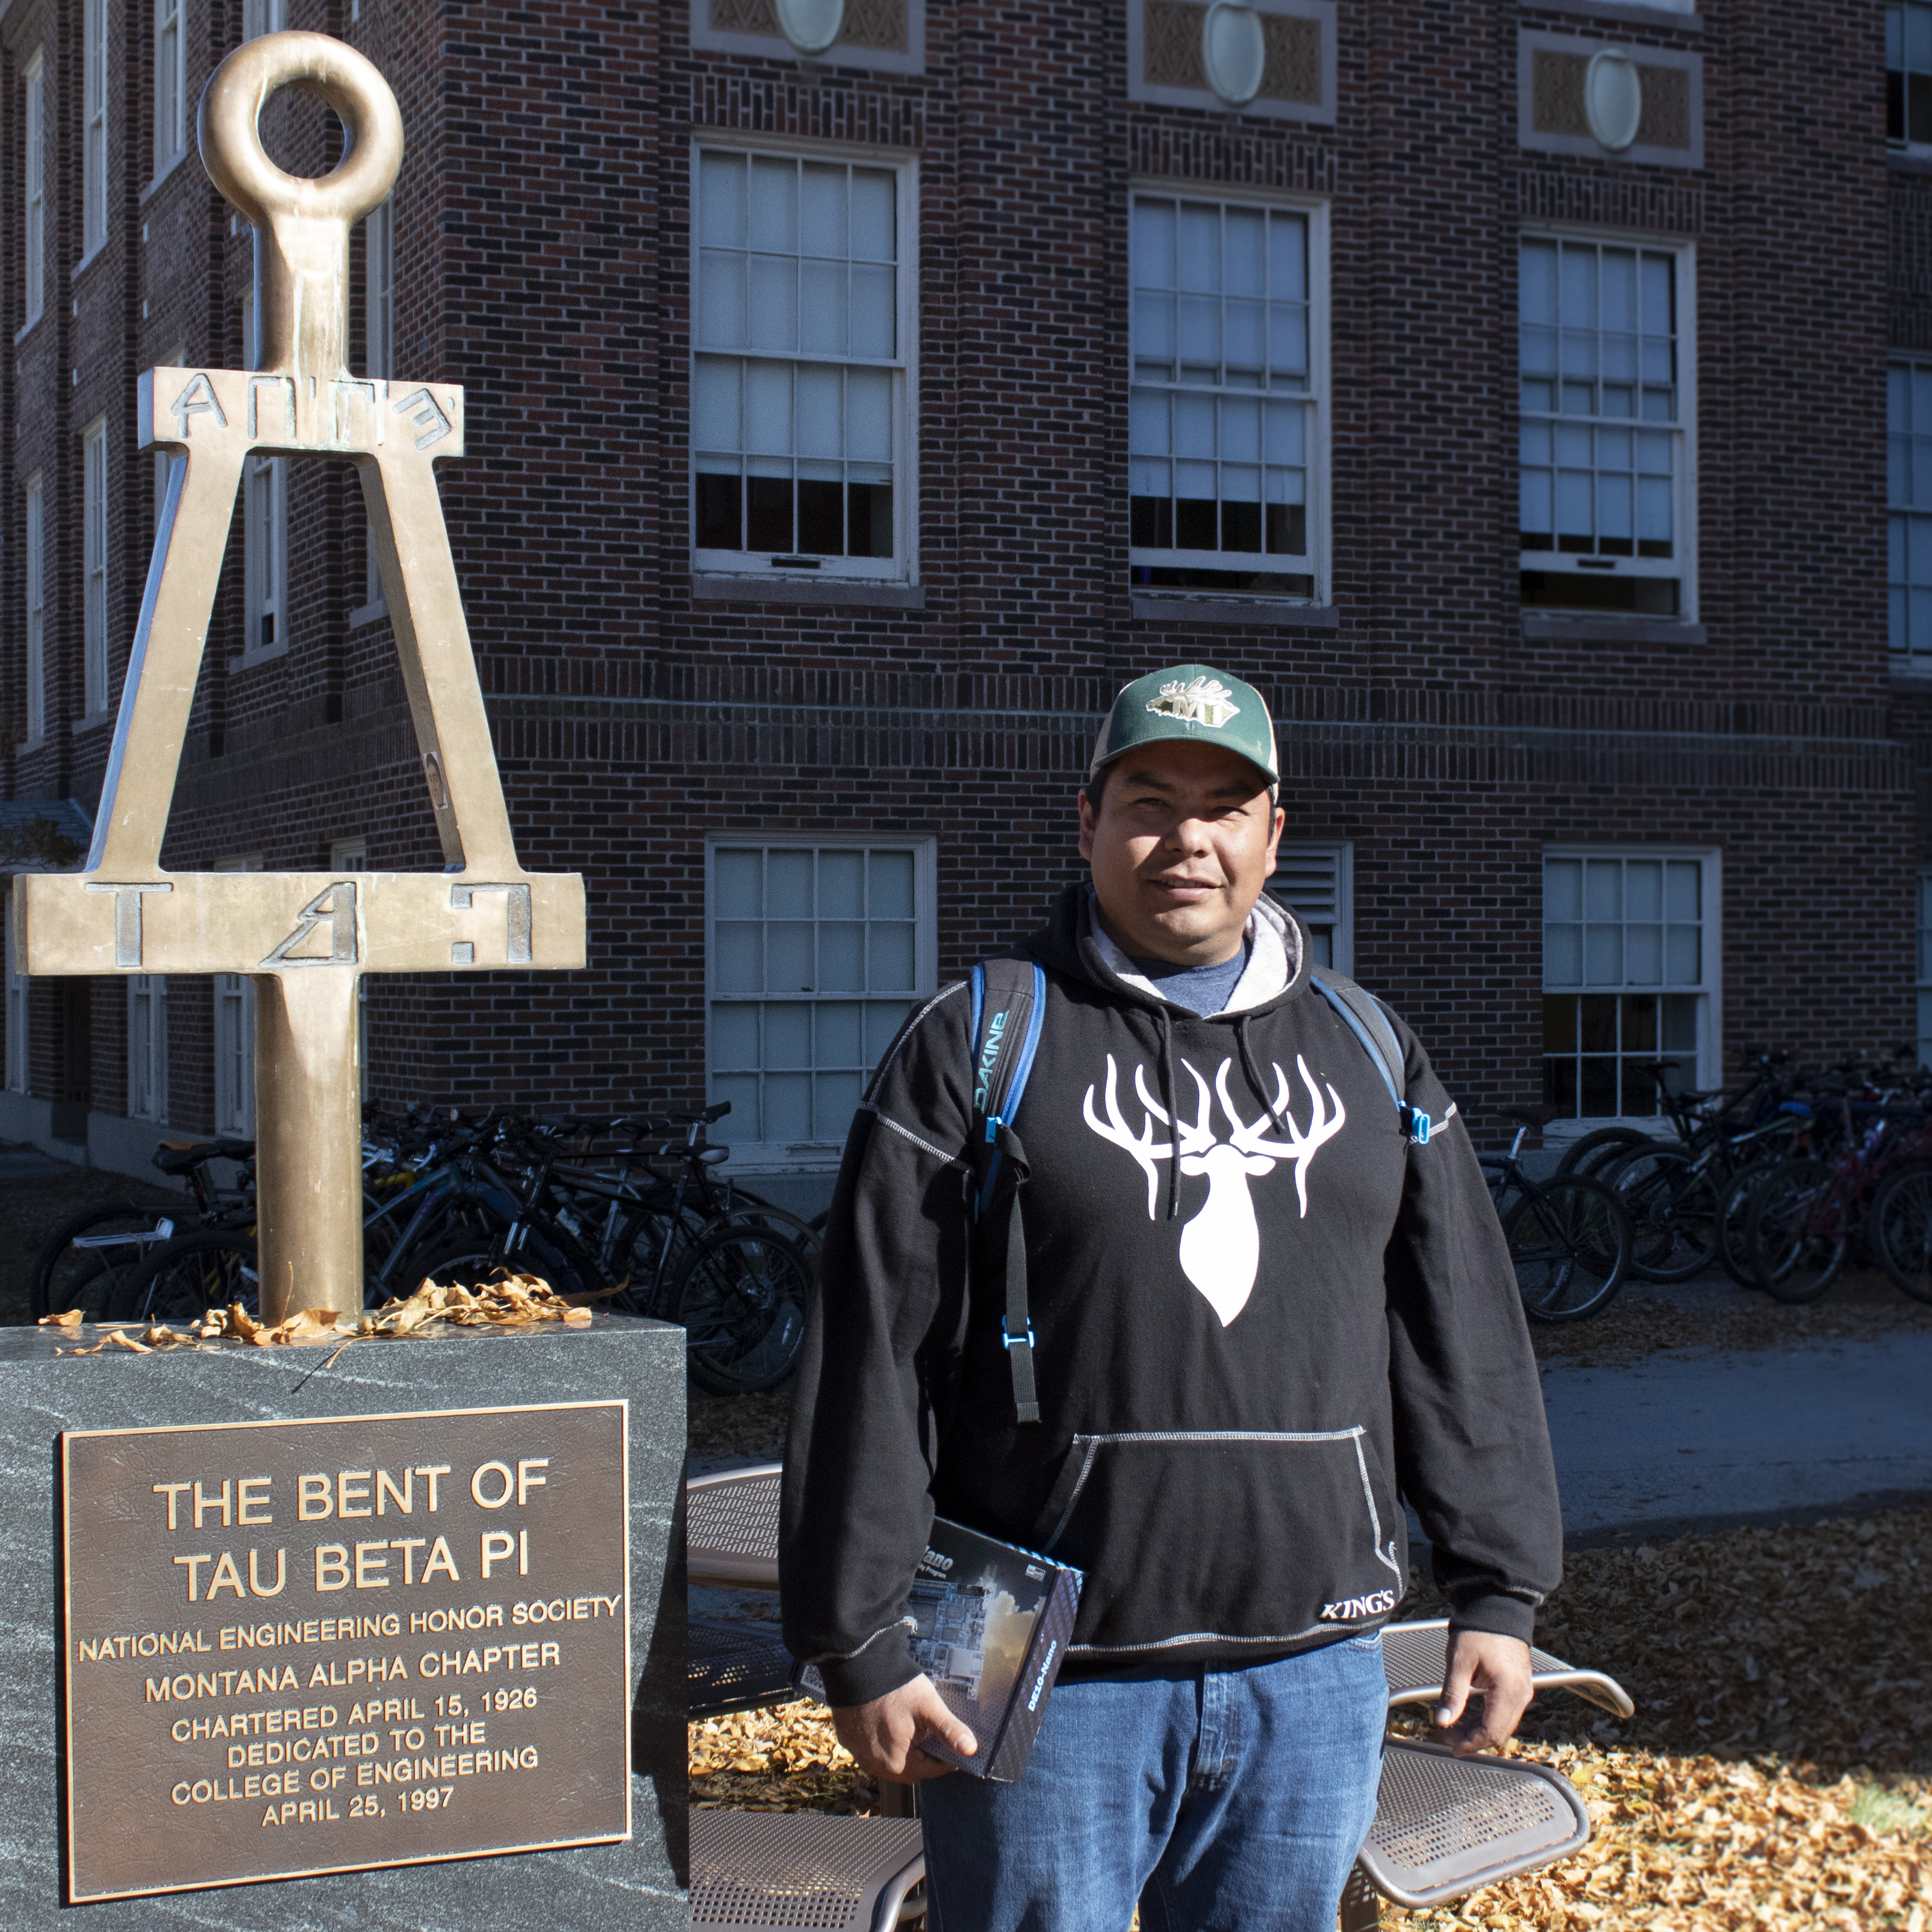 Randall standing outside one of campus' buildings